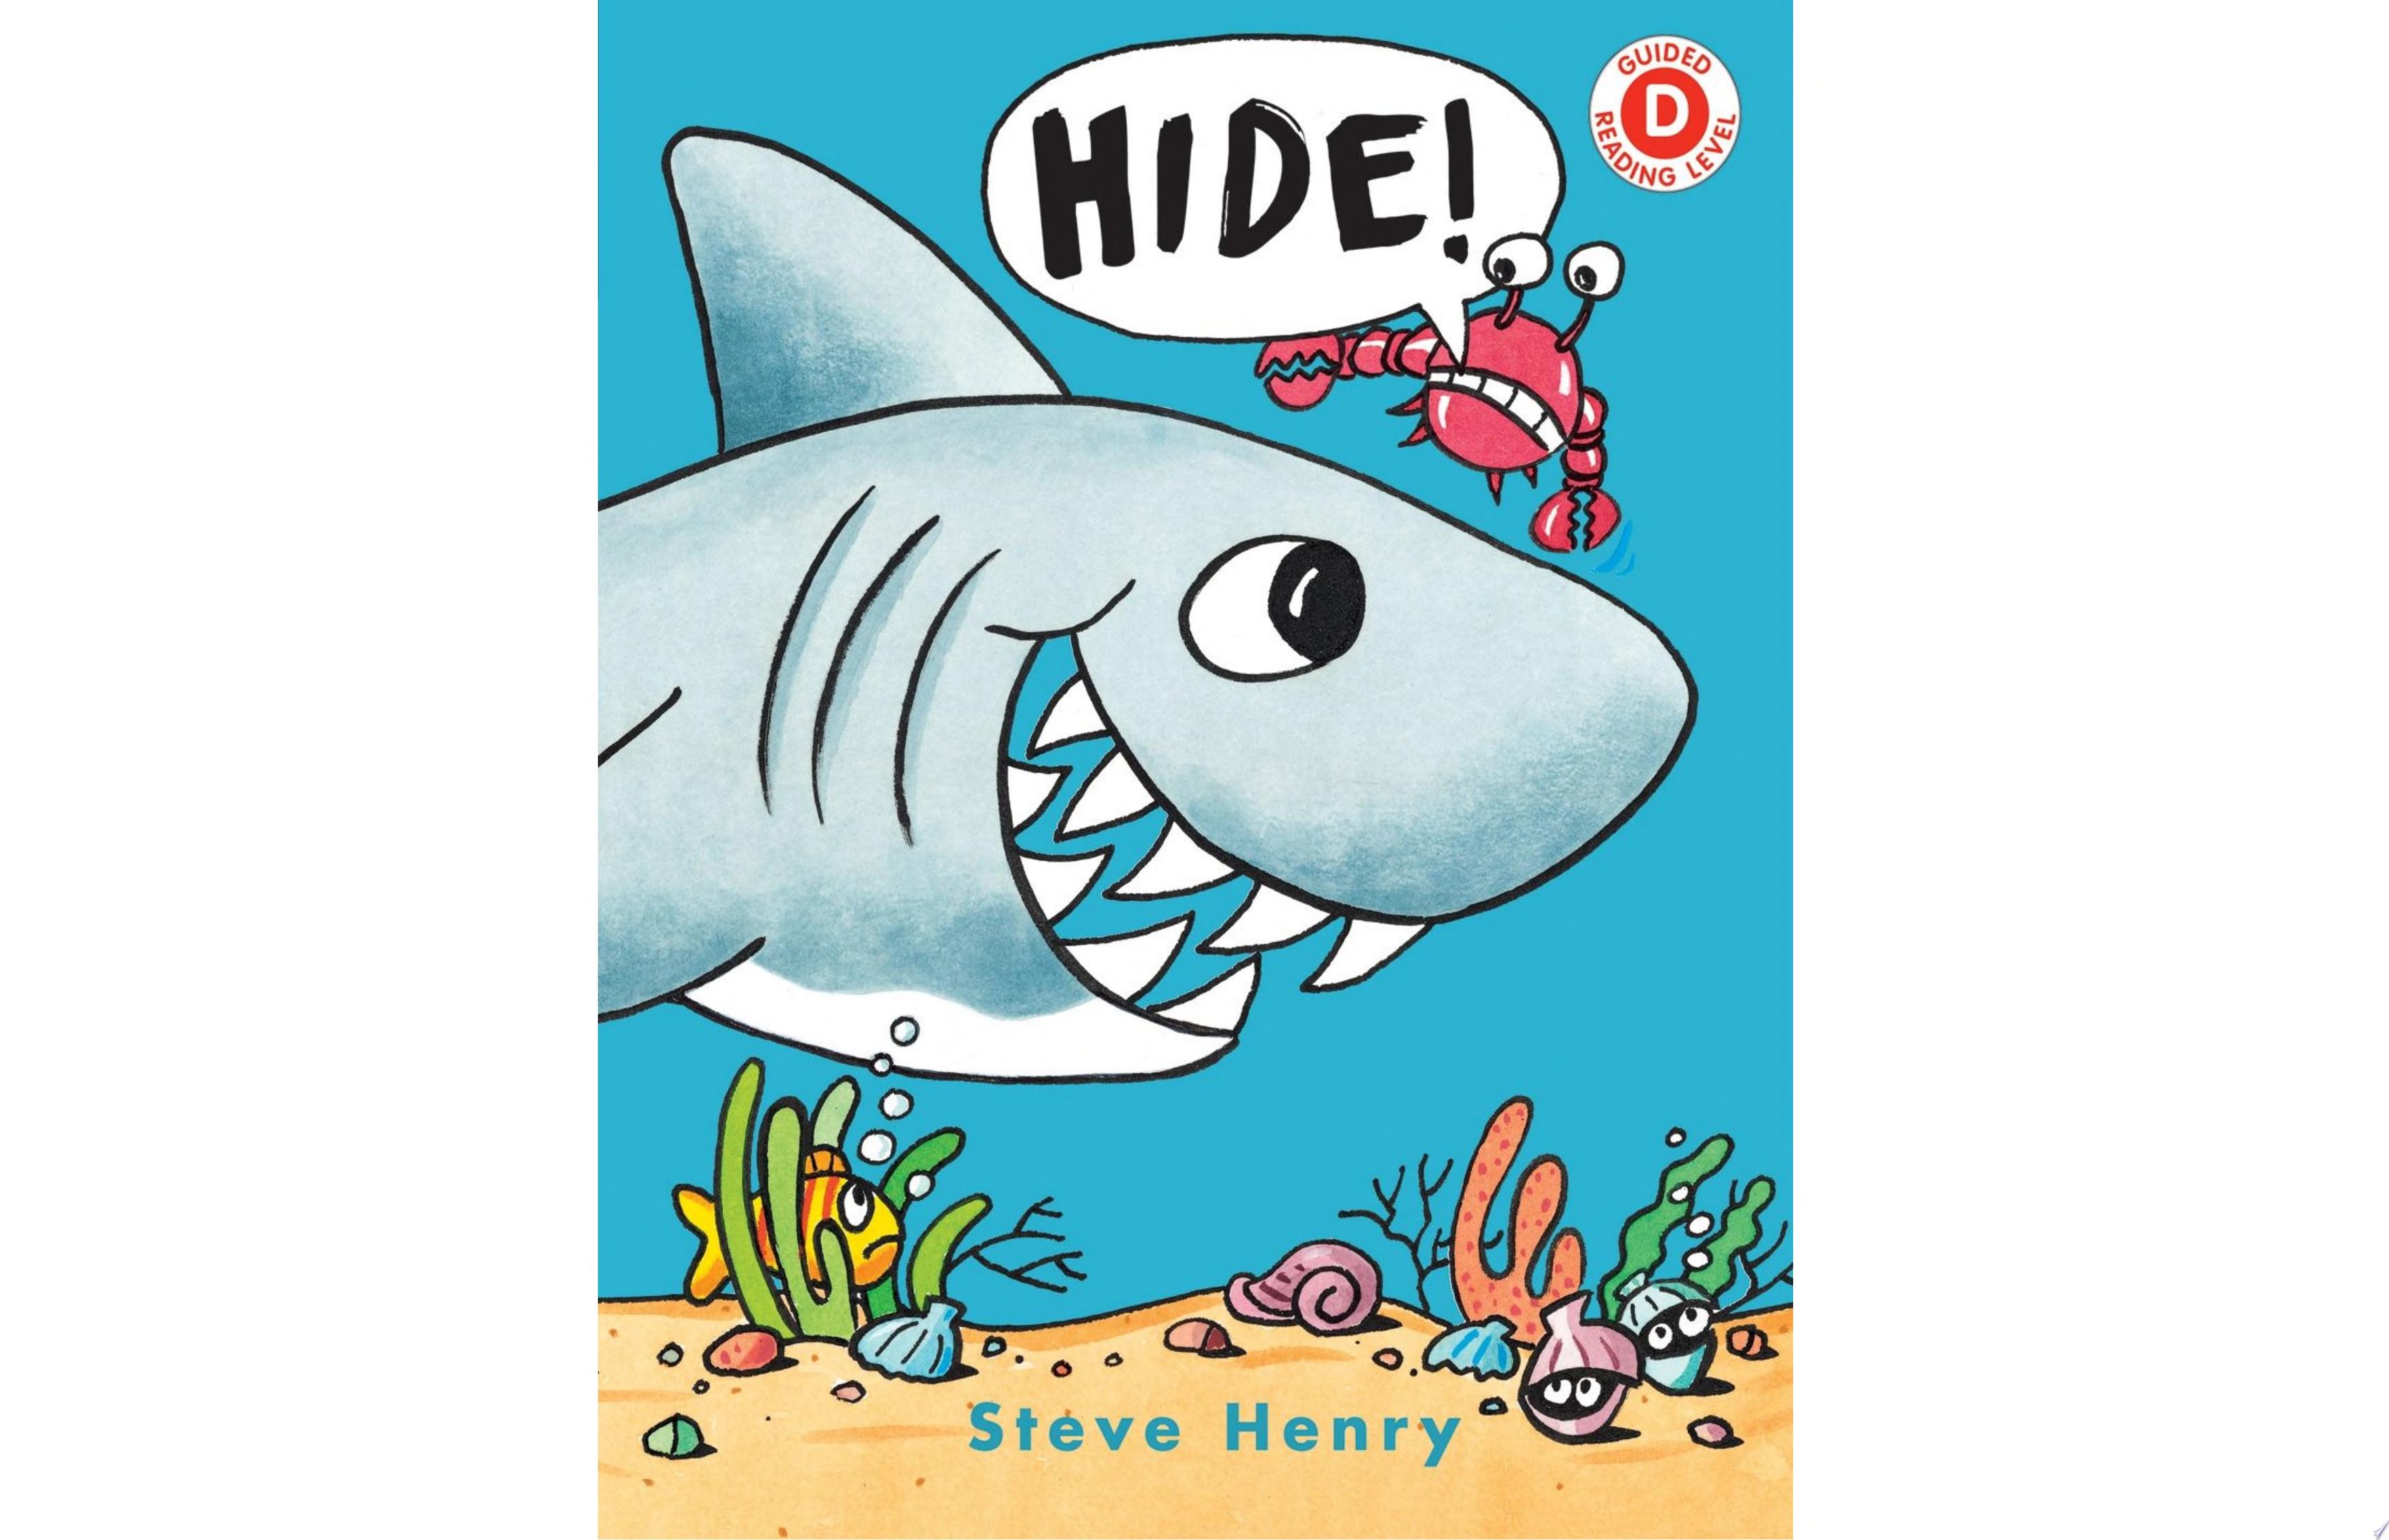 Image for "Hide!"